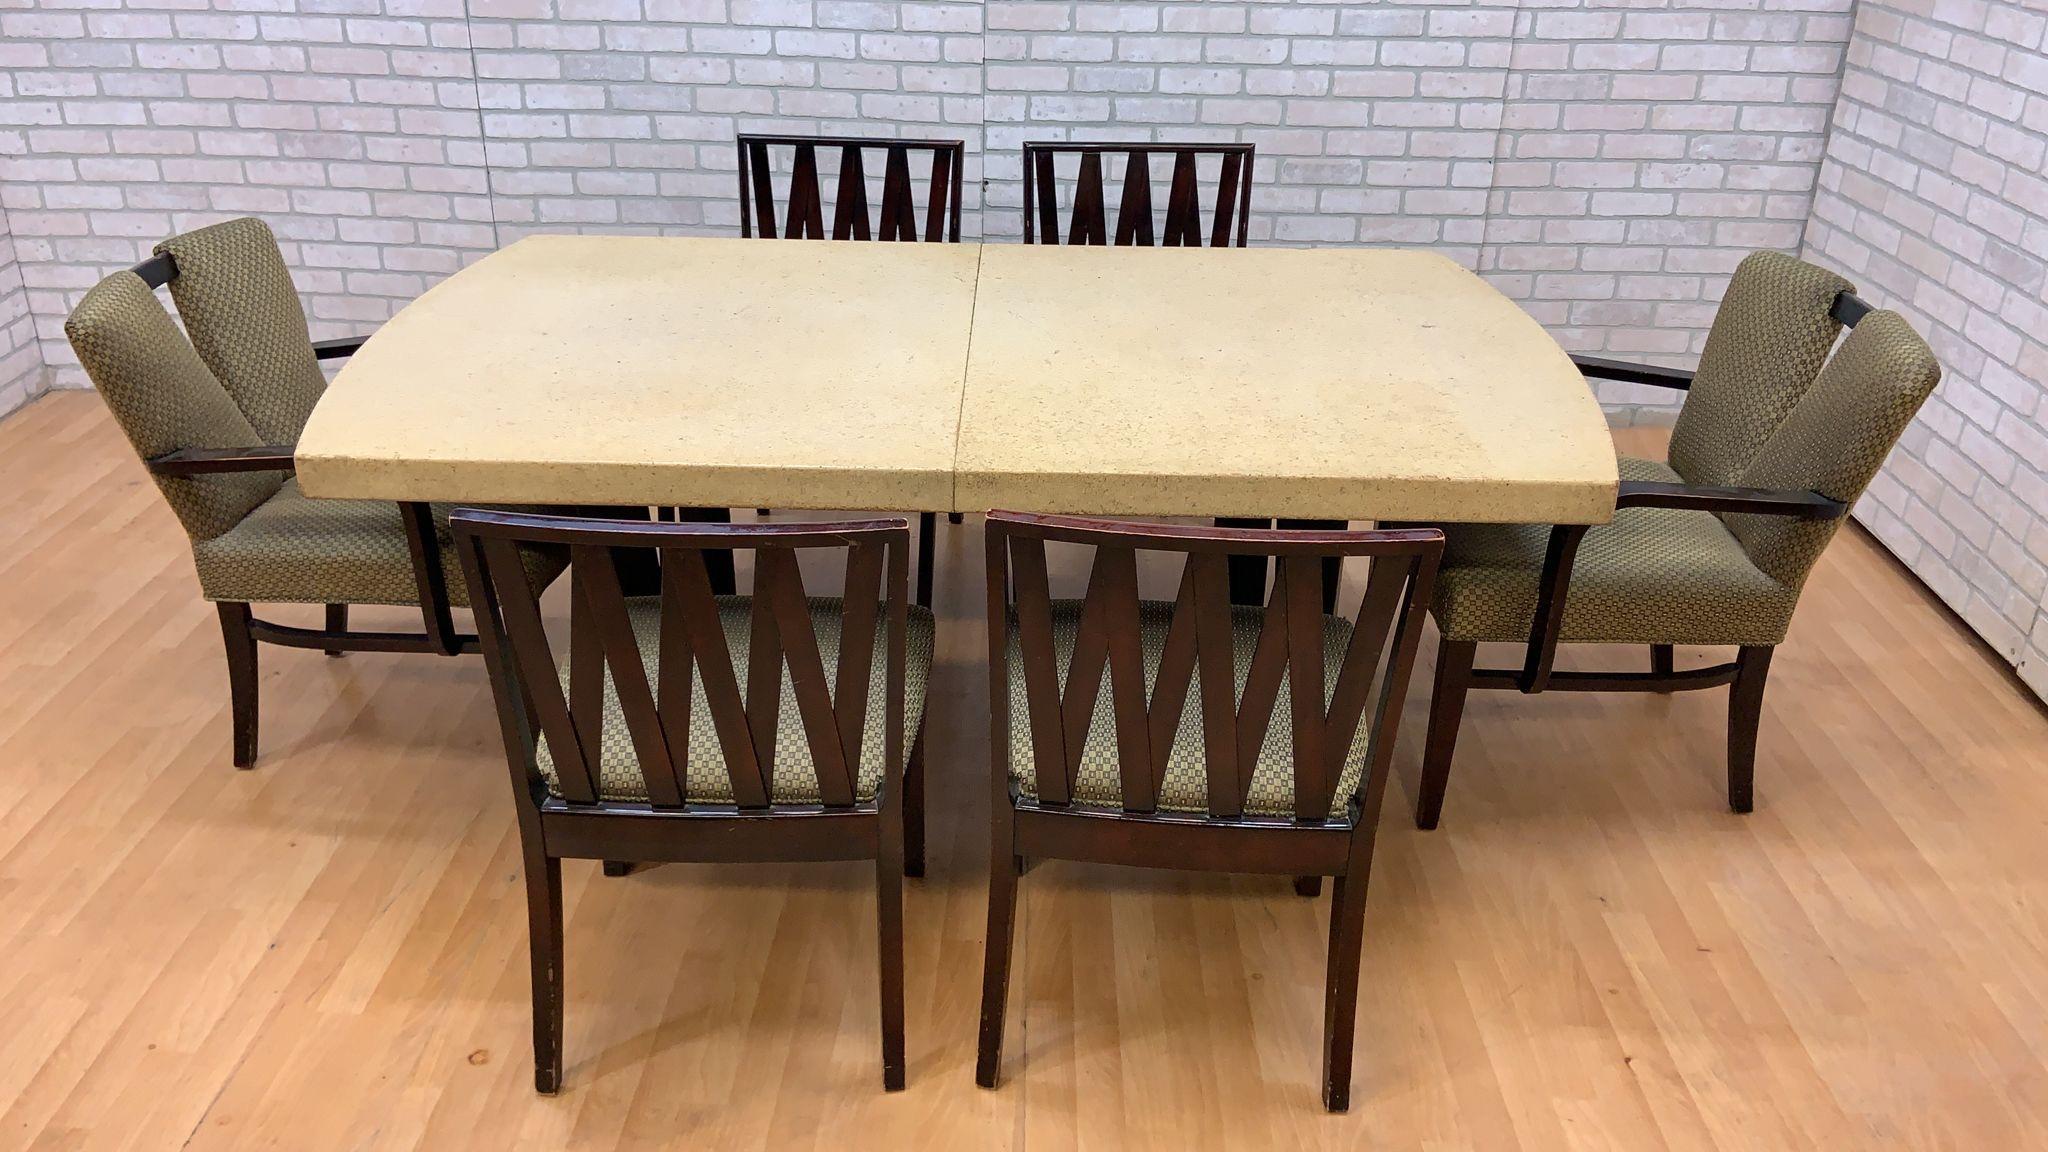 Art Deco Paul Frankl for Johnson Furniture mahogany and cork dining set - 9 piece set.

An exquisite, iconic and truly timeless and unparalleled classic dining set by Paul Frankl for Johnson Furniture Co. 

A wonderful dining table comprising a